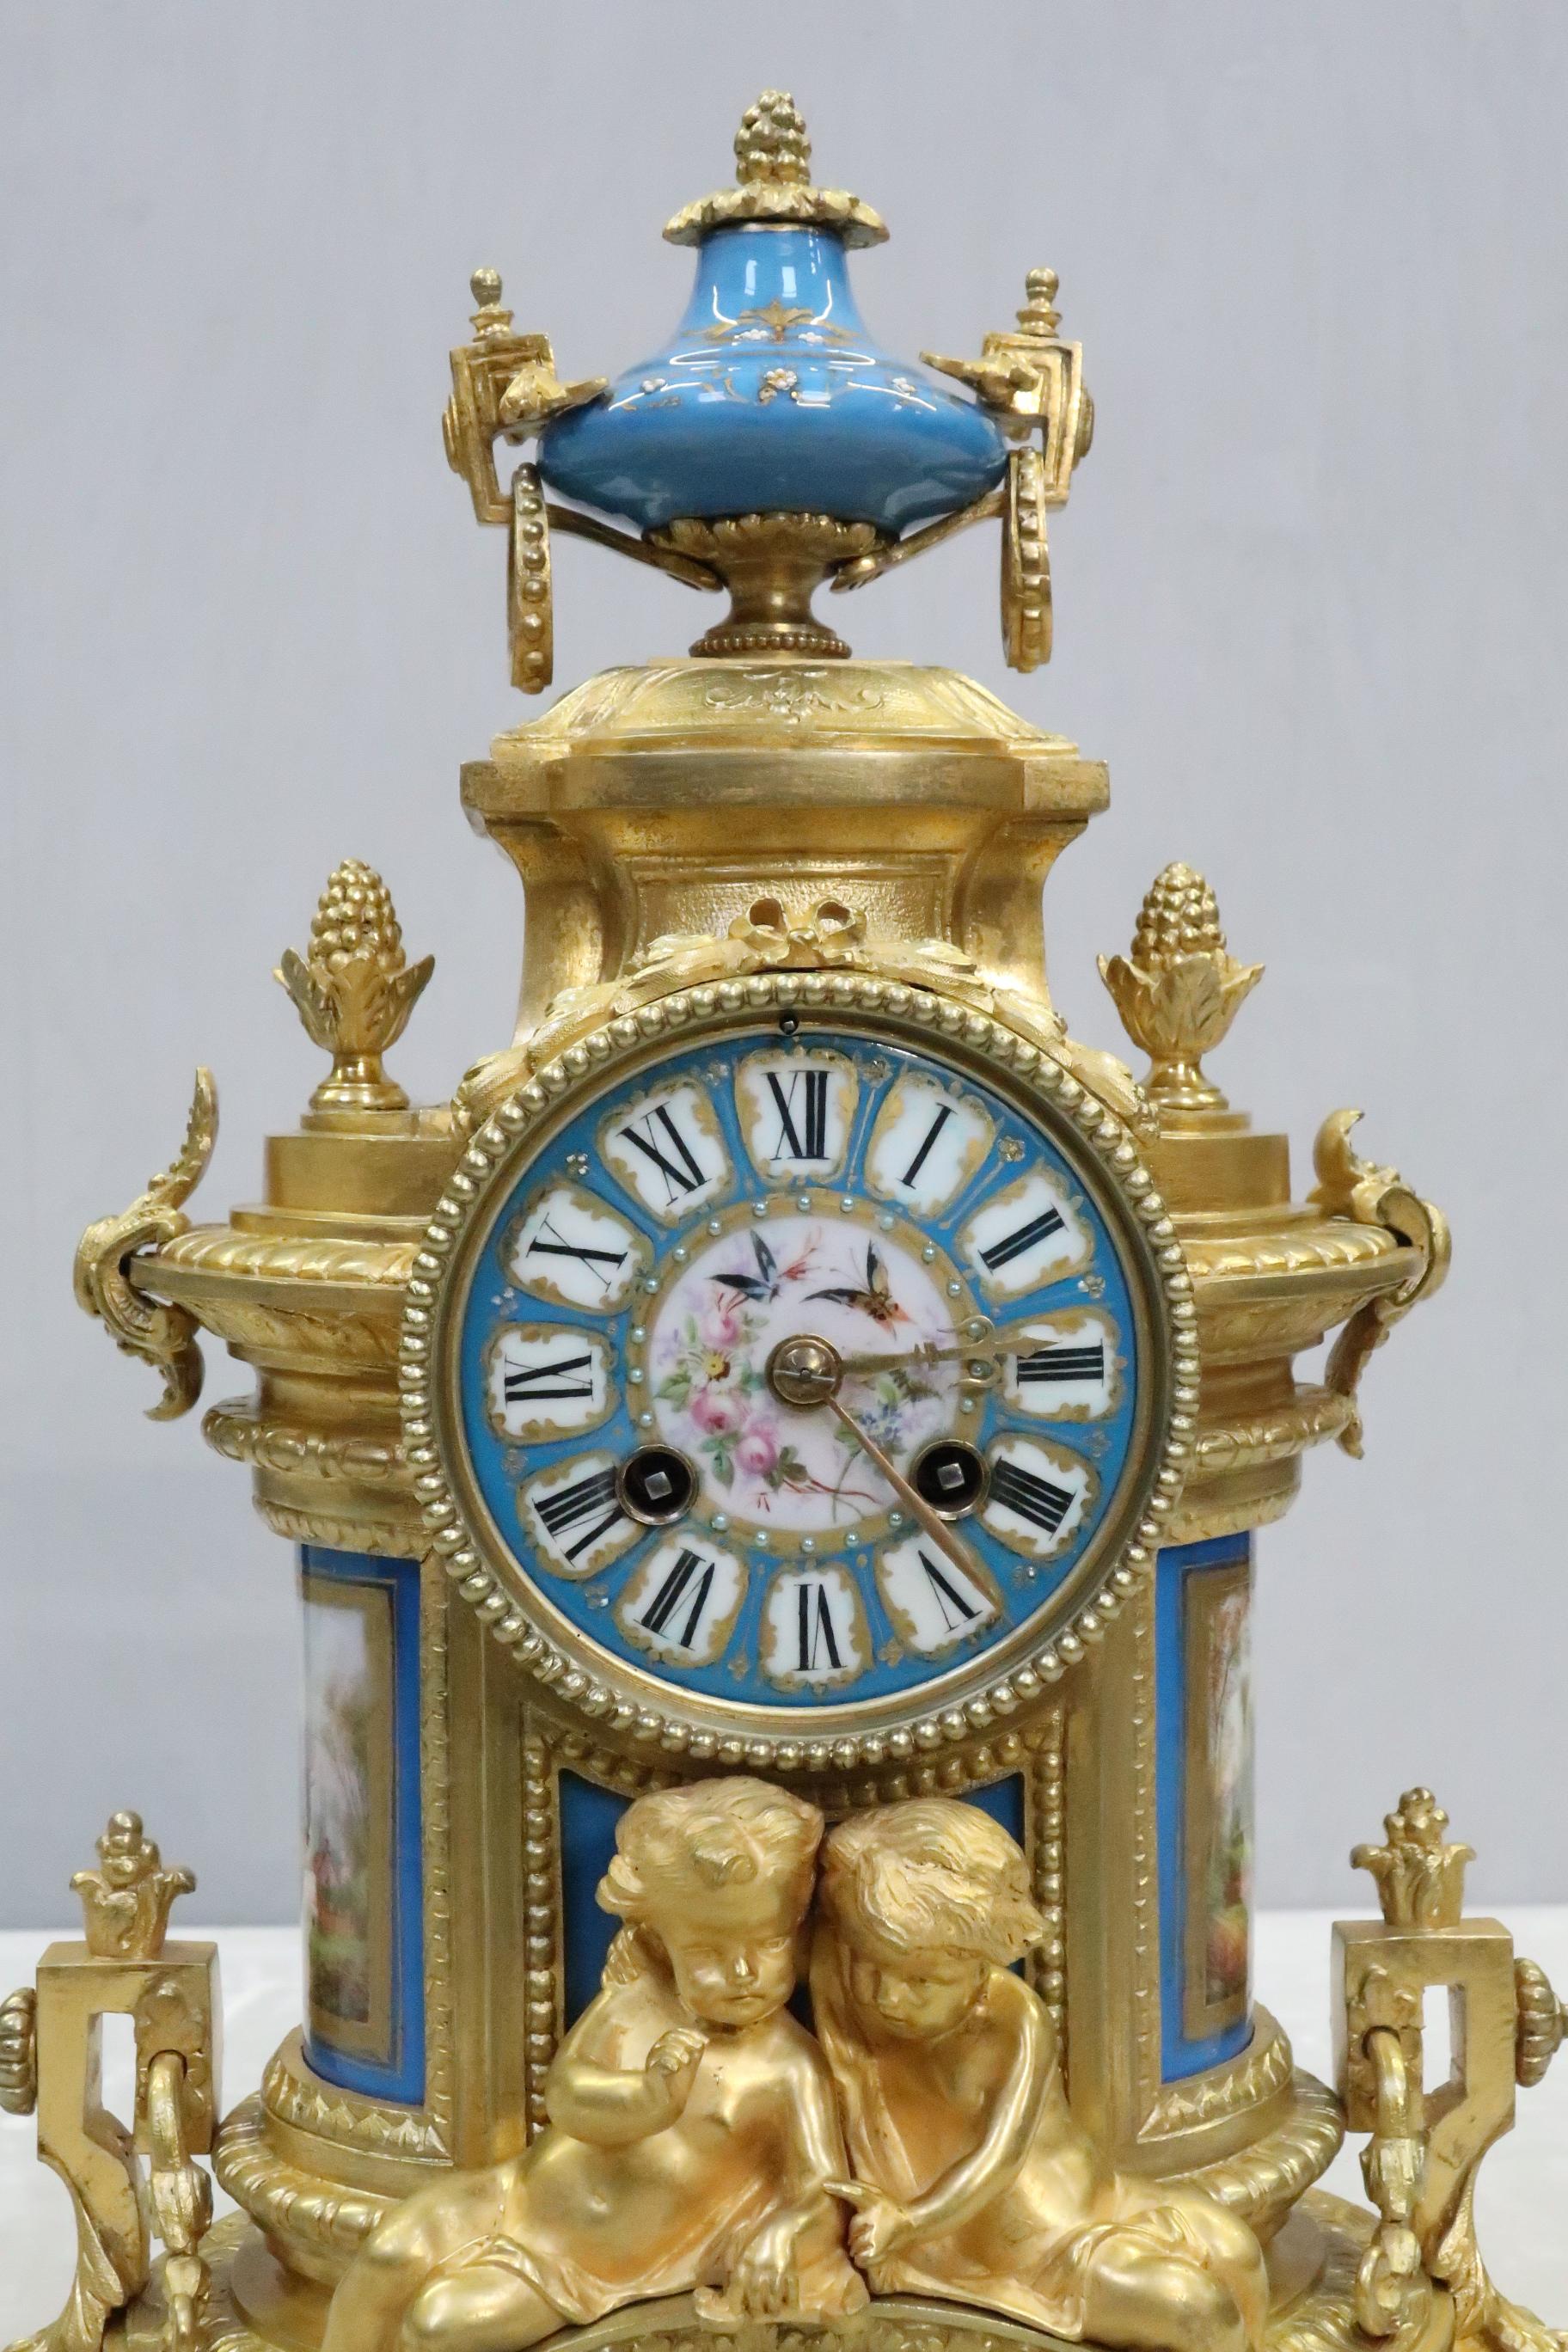 An impressive French Napoleon III bronze gilt mantel clock with decorative mouldings, beaded detail, and leaf design throughout adorned with putti and surmounted with finals and porcelain urn. The clock has inset blue sevre style porcelain panels